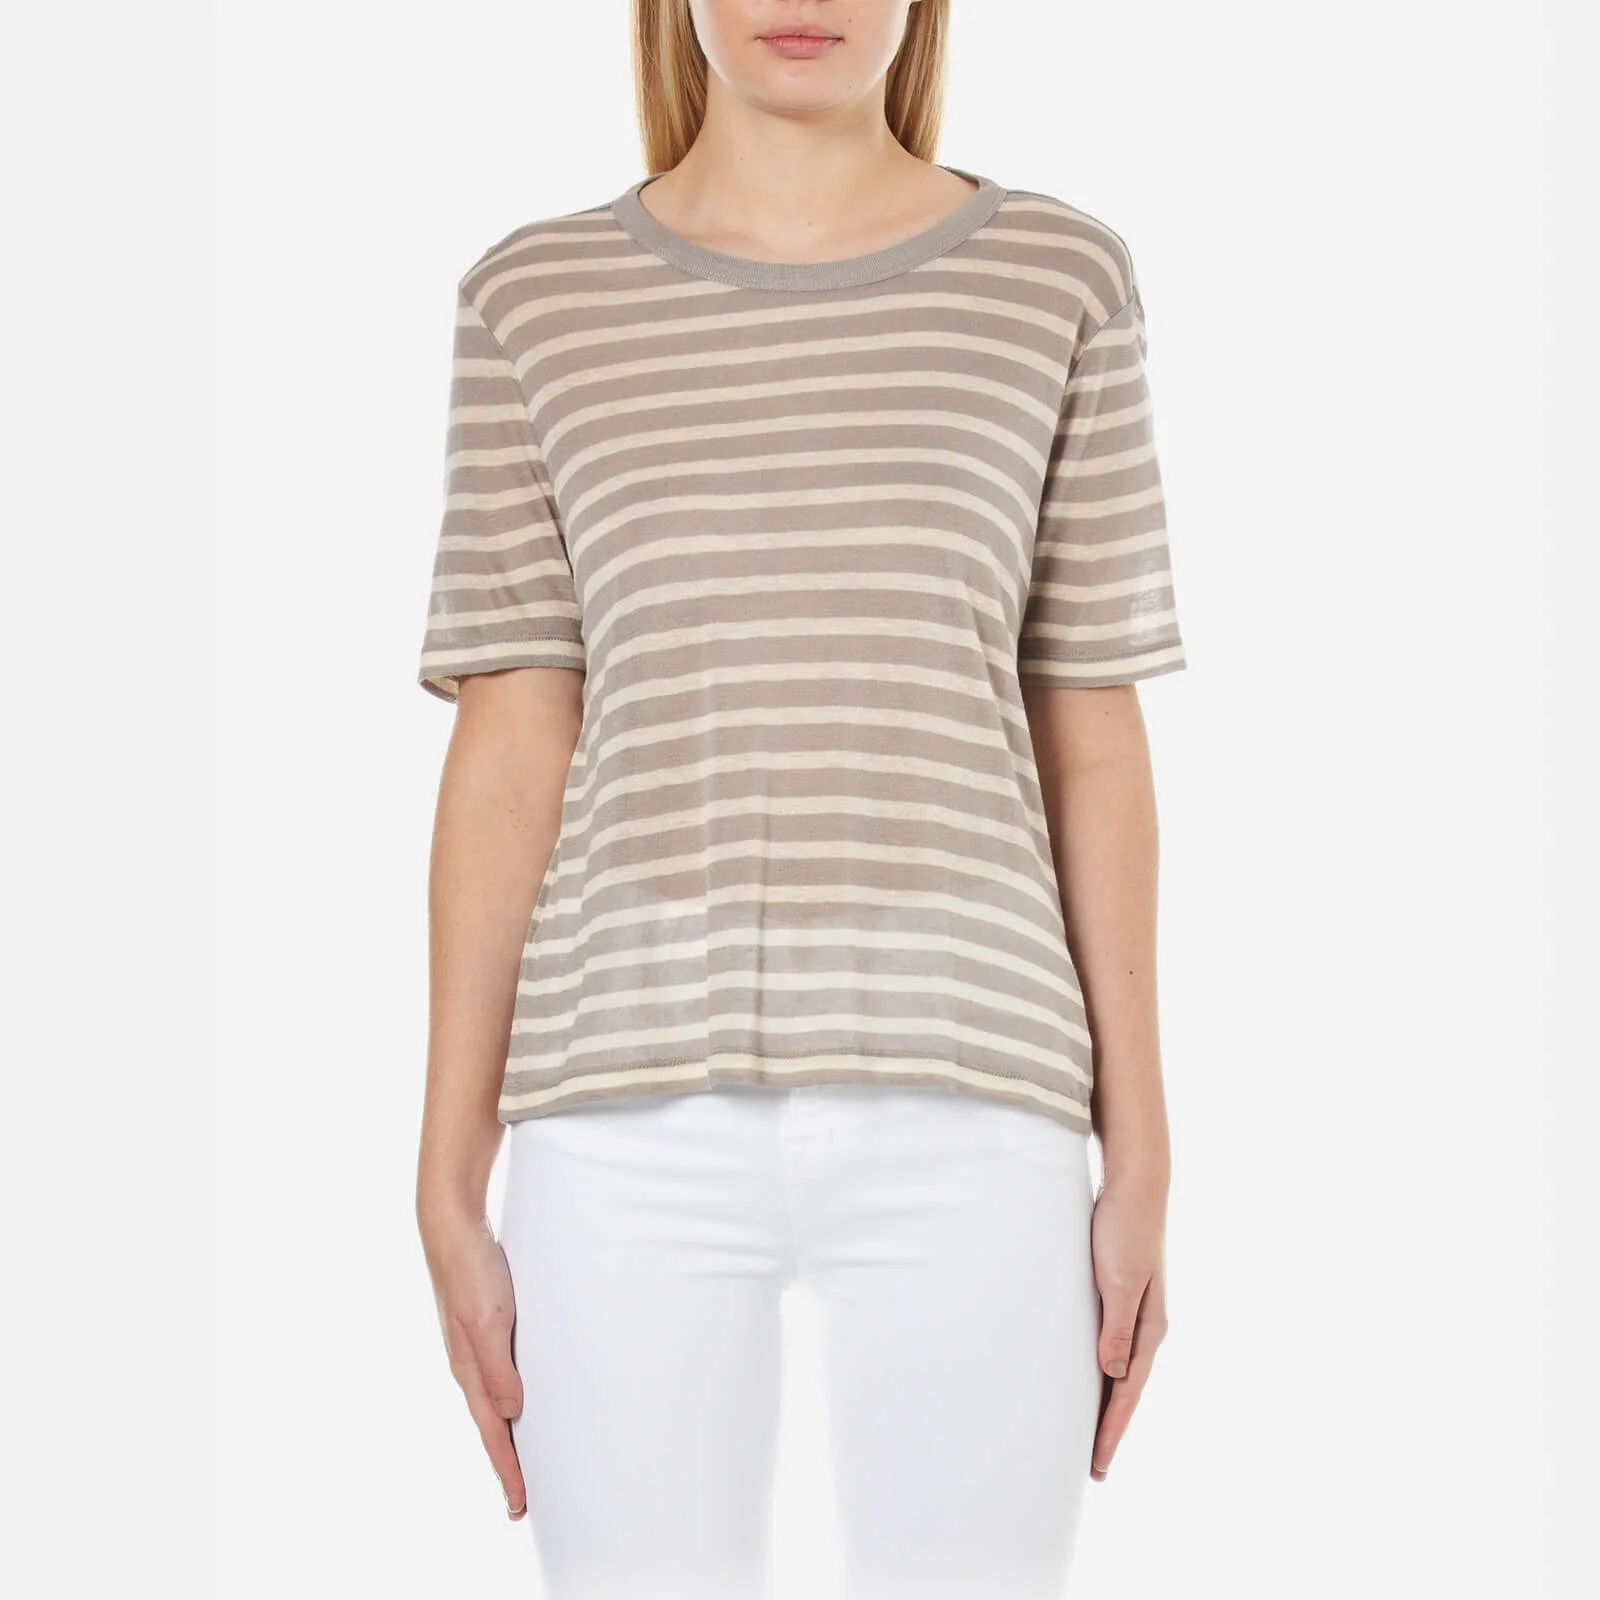 T by Alexander Wang Women's Rayon Linen Stripe Short Sleeve Cropped T-Shirt - Butter/Taupe Image 1